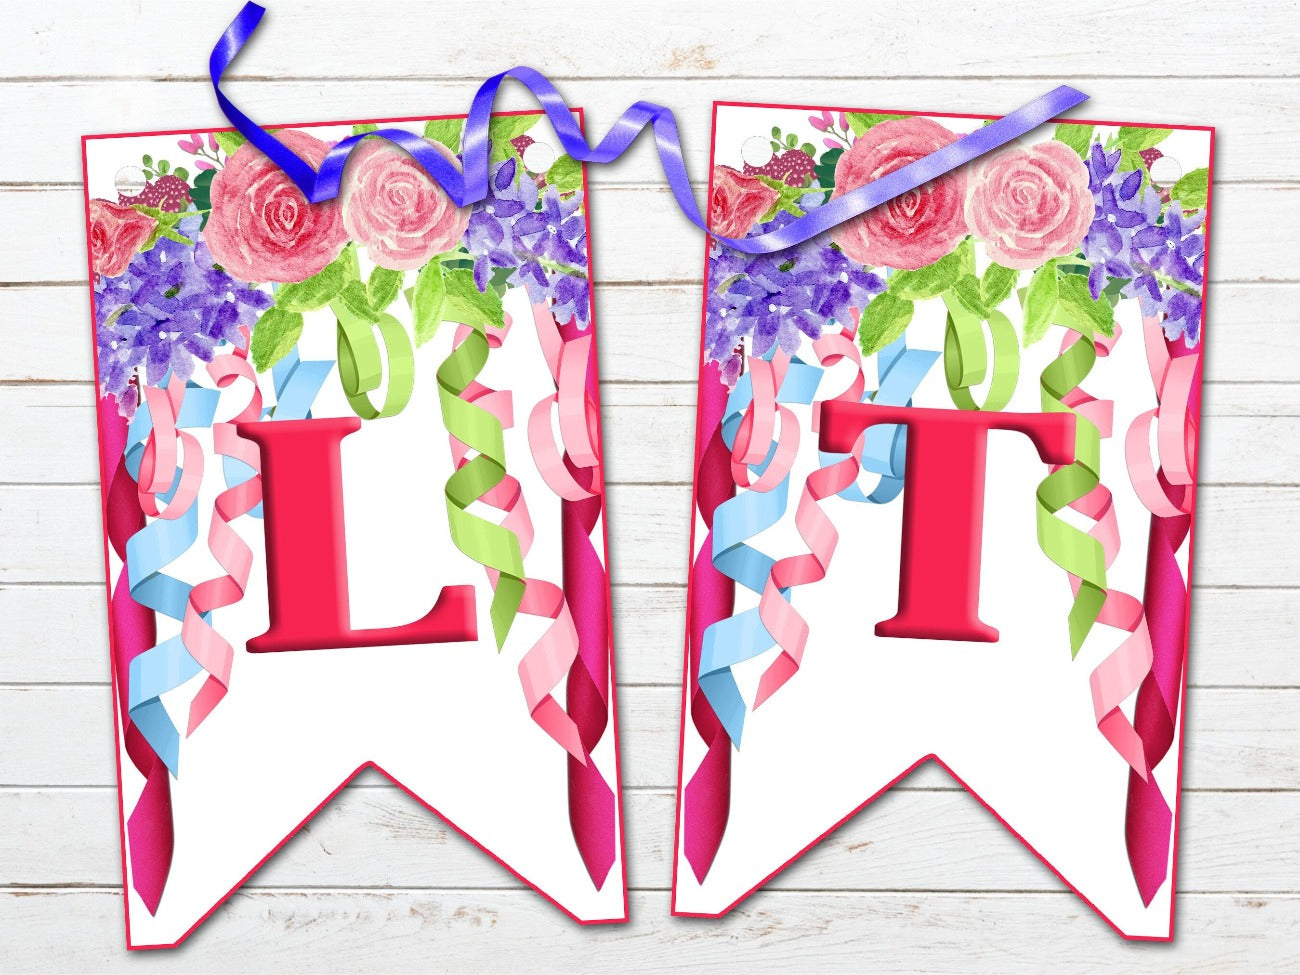 BELTANE BANNER, Pagan Altar Garland Decoration, L & T, each flag has pastel ribbons and flowers in colors of pink, mauve, green and blueoon a white background - Morgana Magick Spell